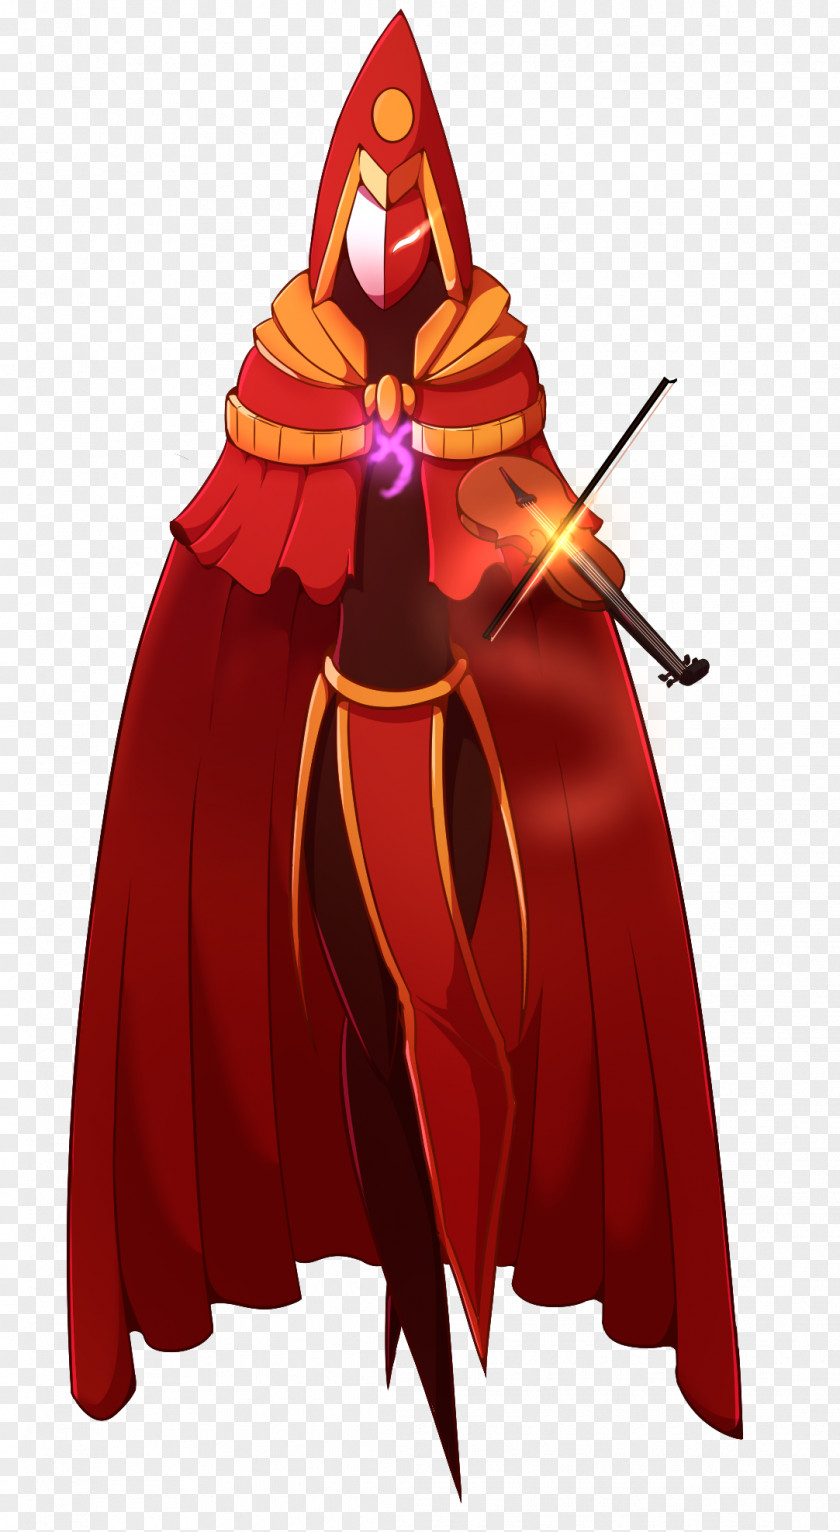 Violinist Sign Graphics Costume Design Outerwear Legendary Creature PNG